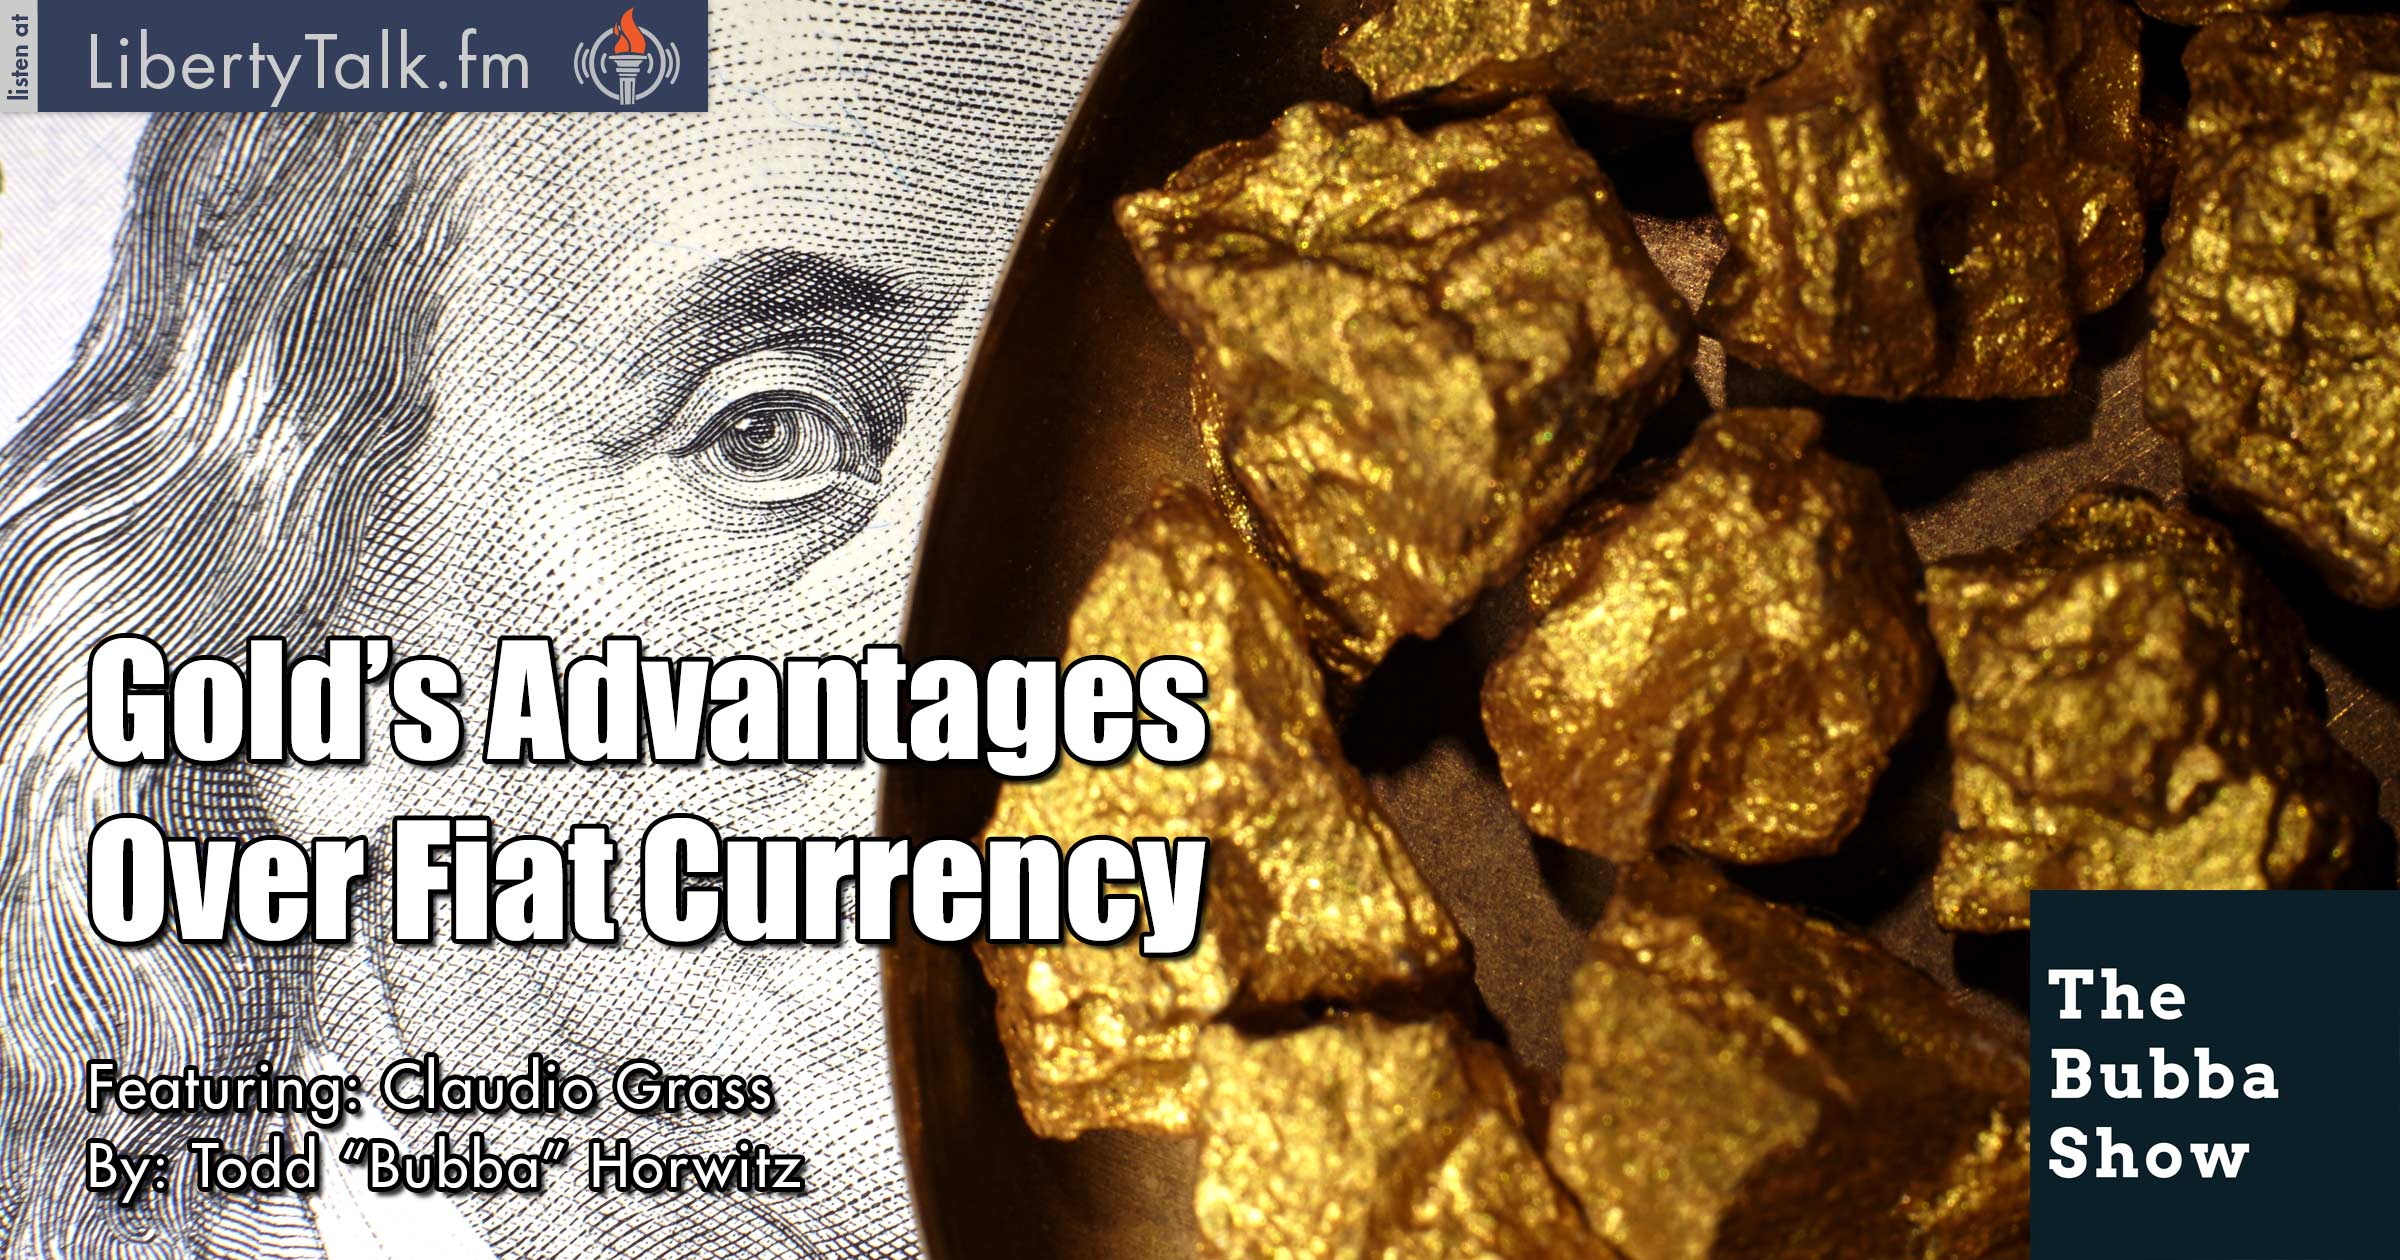 Gold’s Advantages Over Fiat Currency - The Bubba Show